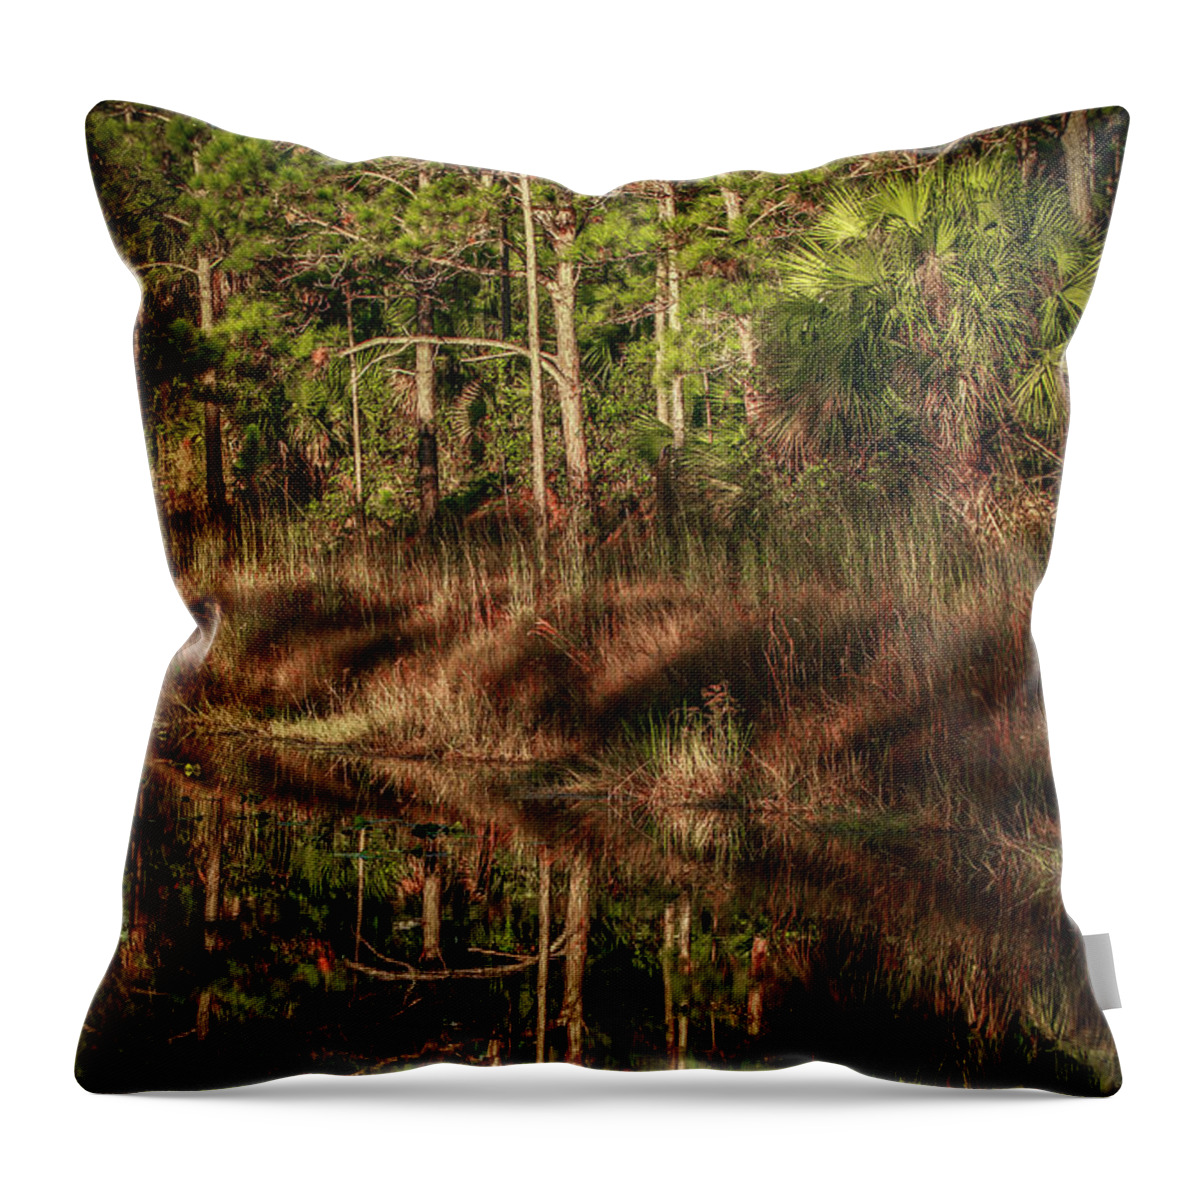 Sun Throw Pillow featuring the photograph Filtering Through the Trees by Tom Claud